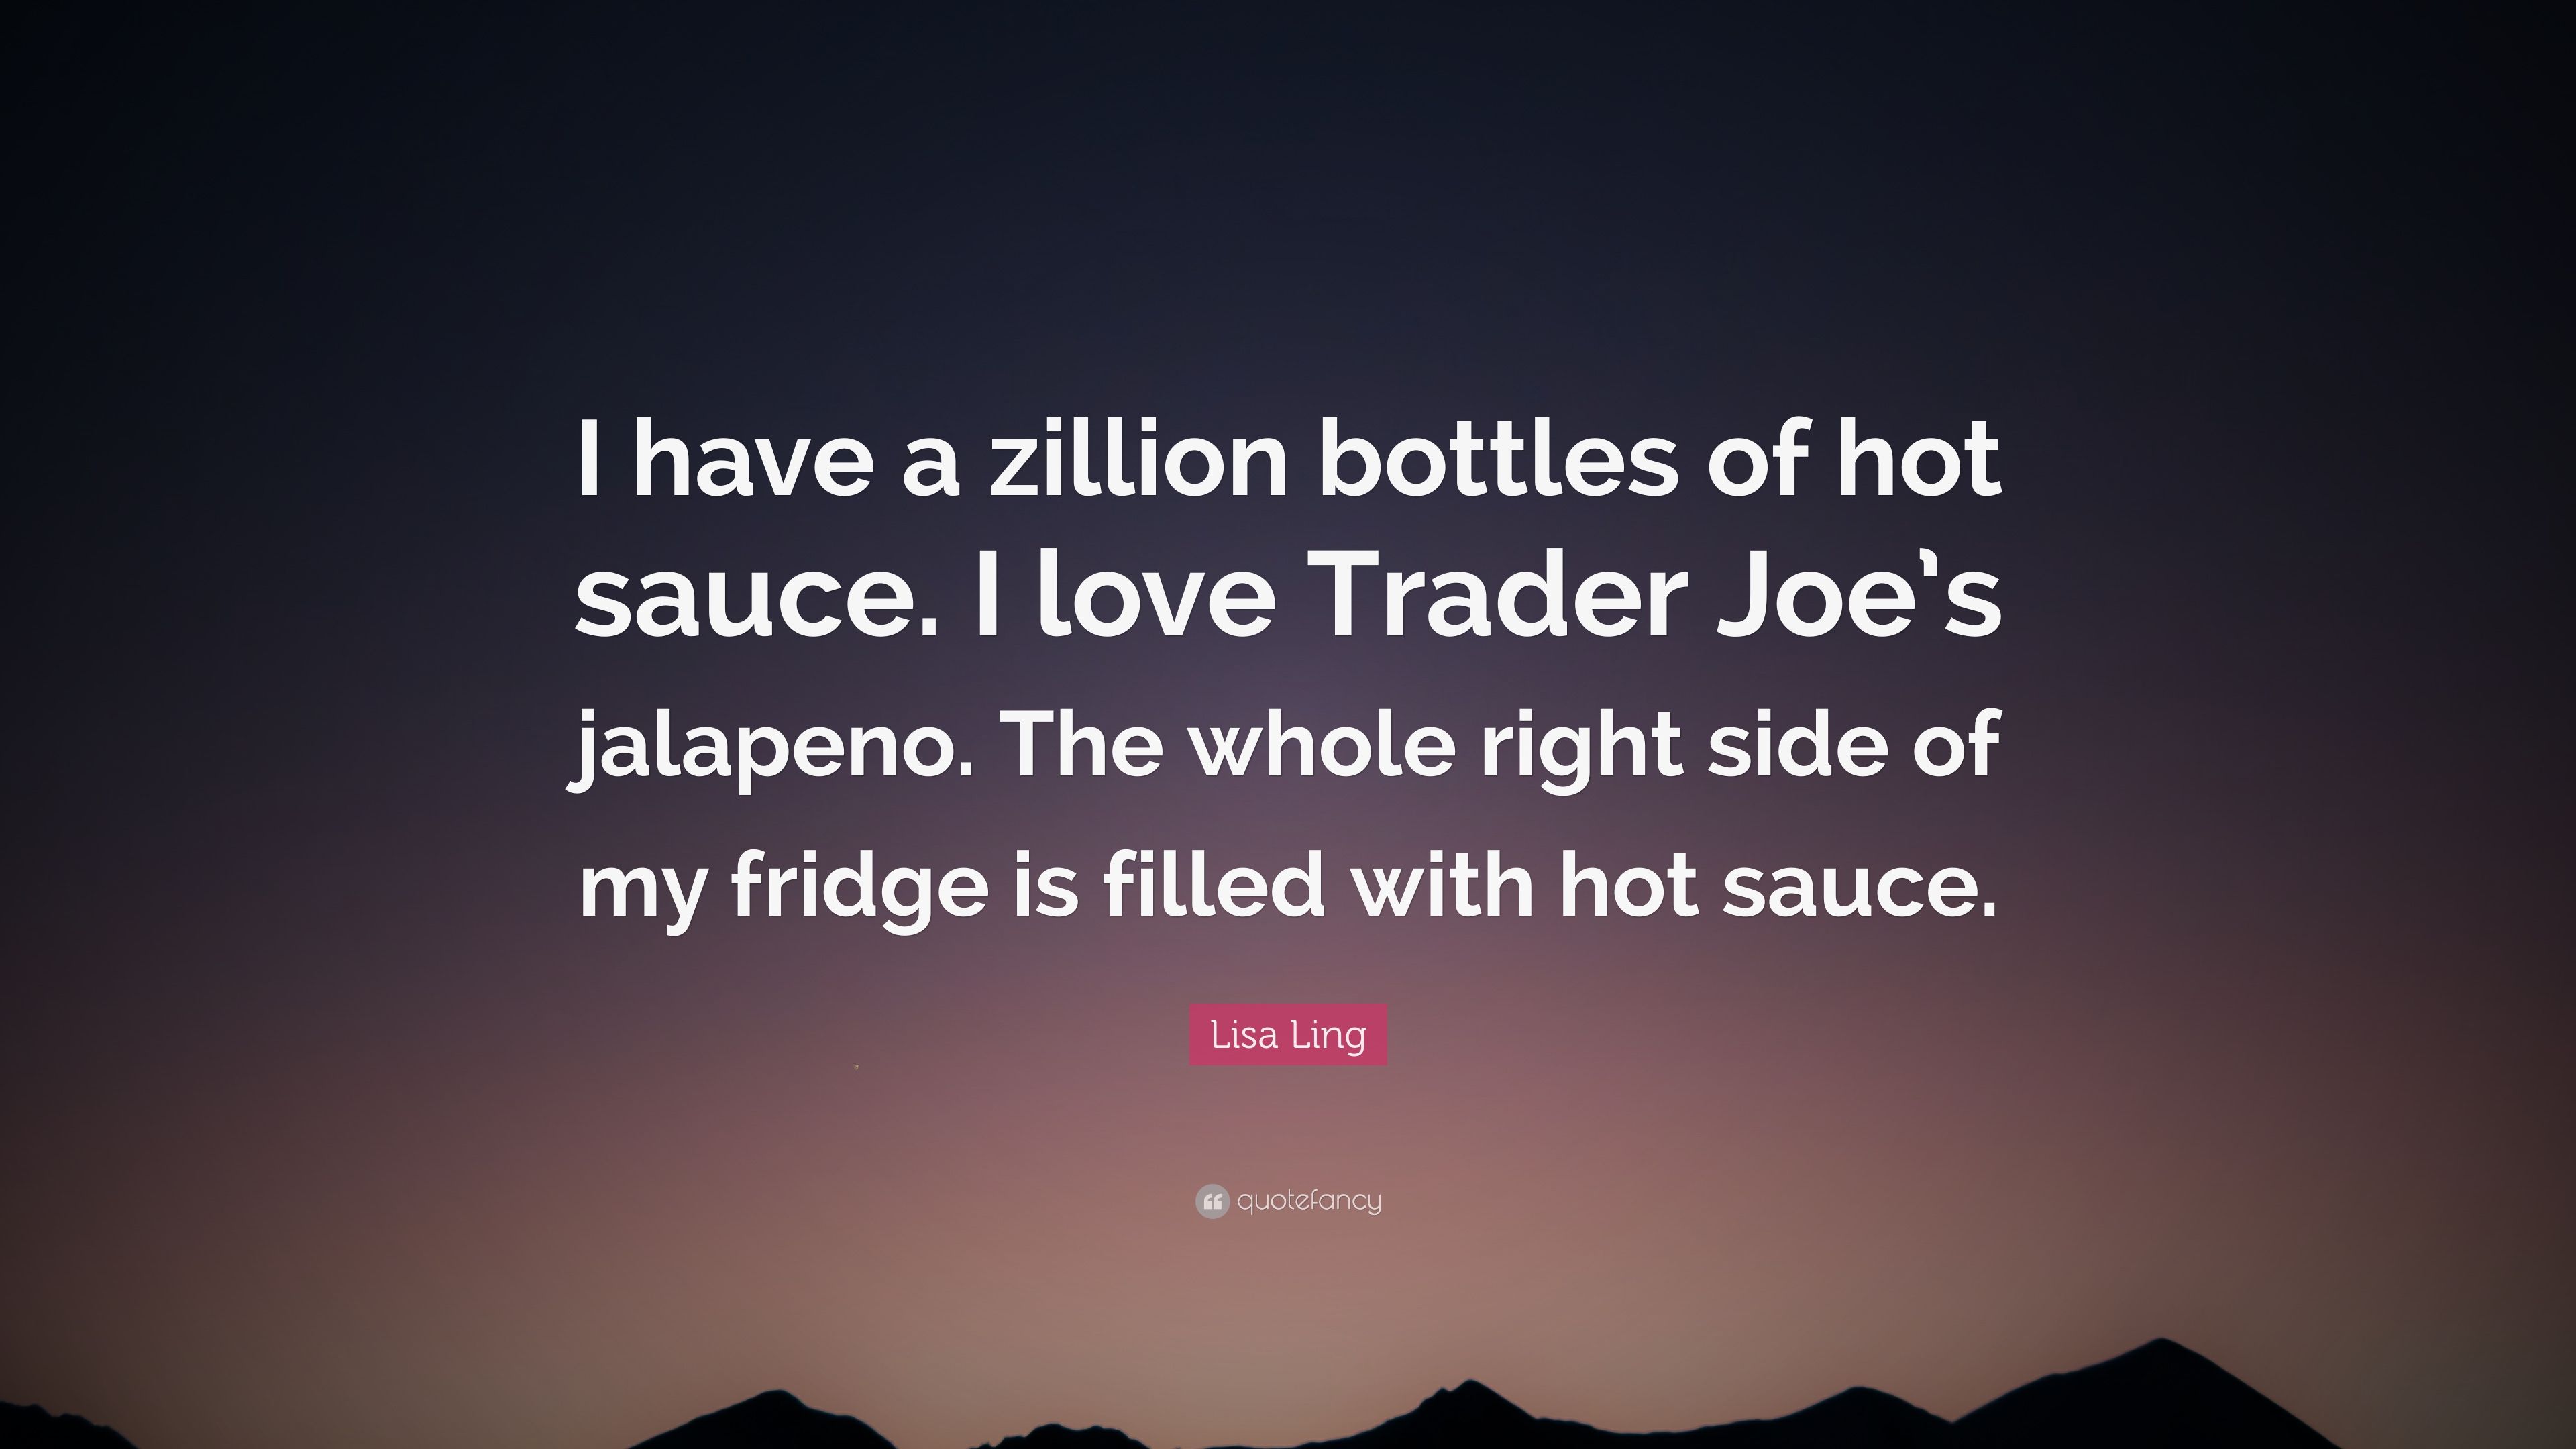 Lisa Ling Quote: “I have a zillion bottles of hot sauce. I love